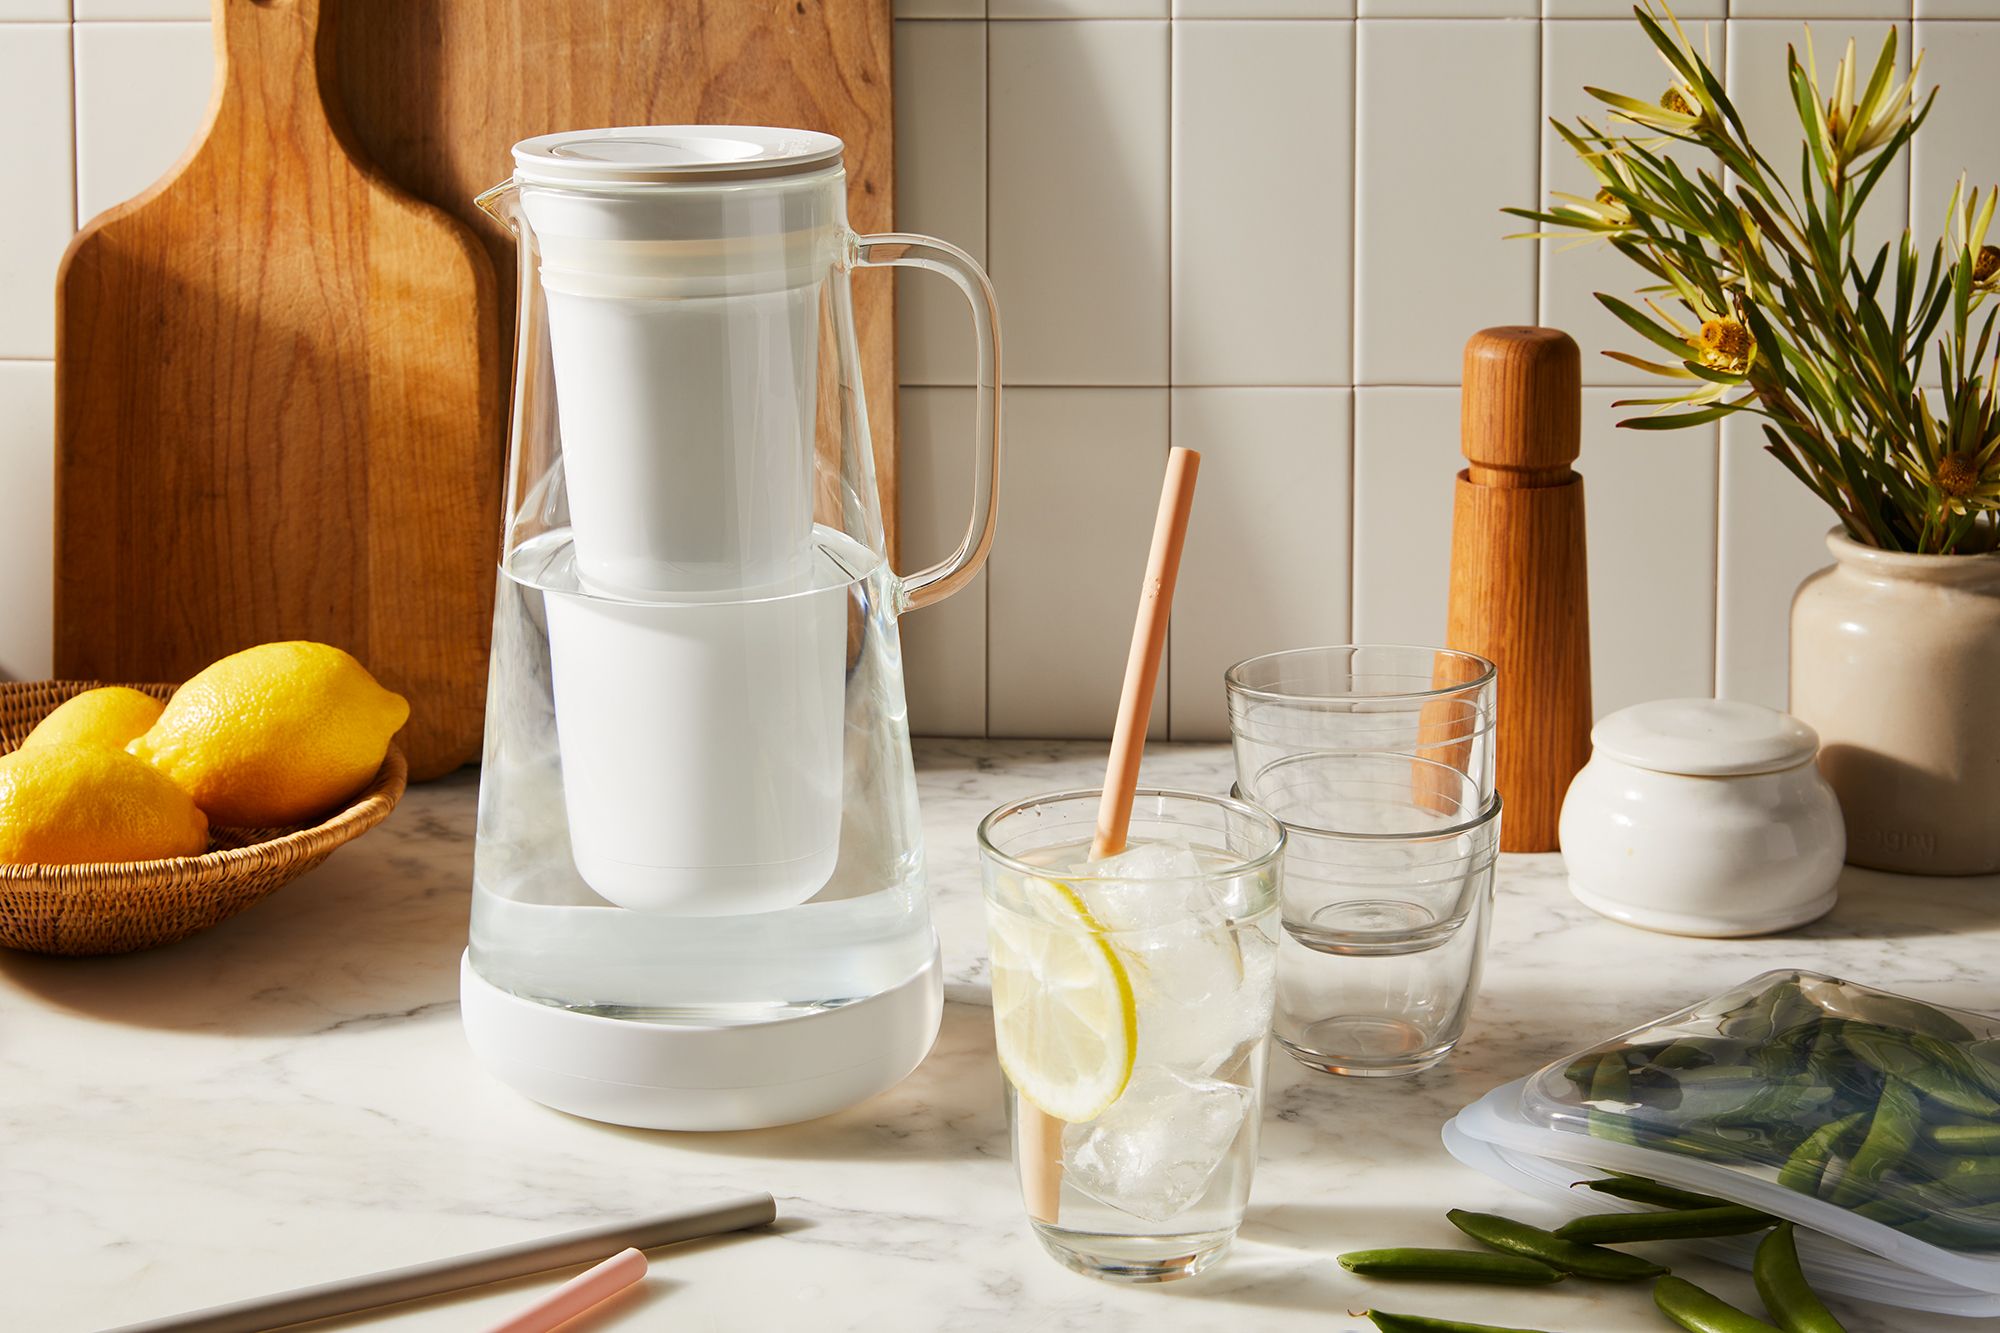 9 Kitchen Must-Haves That Make Great Holiday Gifts